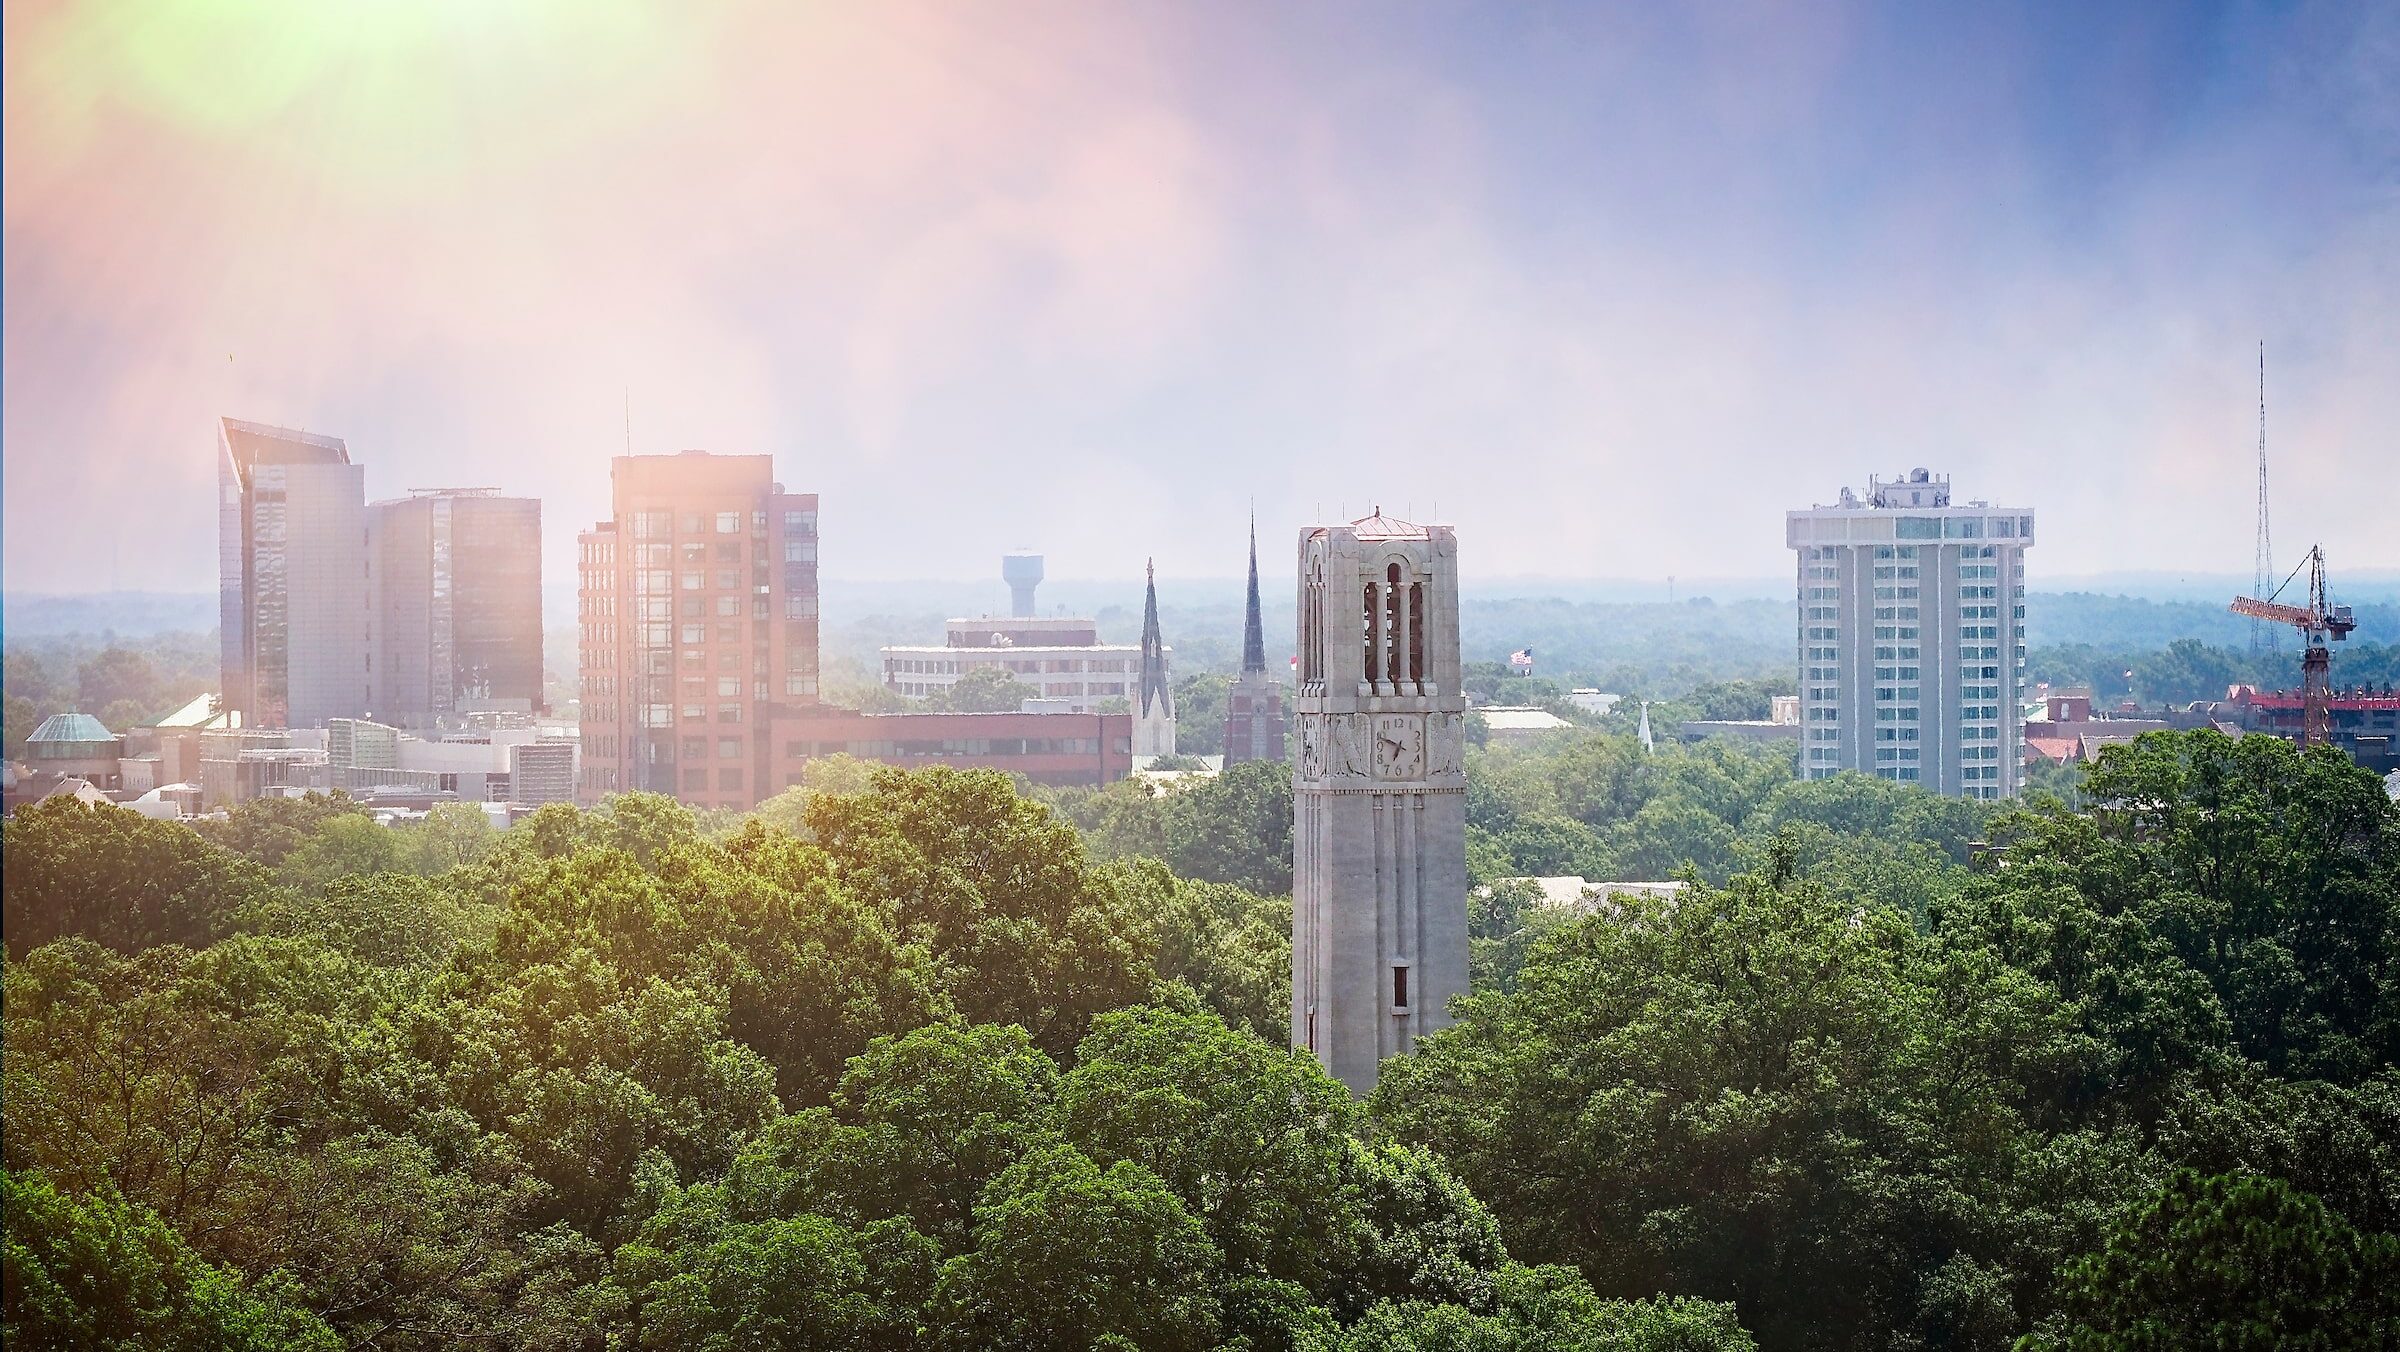 Aerial view of Belltower and downtown Raleigh to the east of campus.